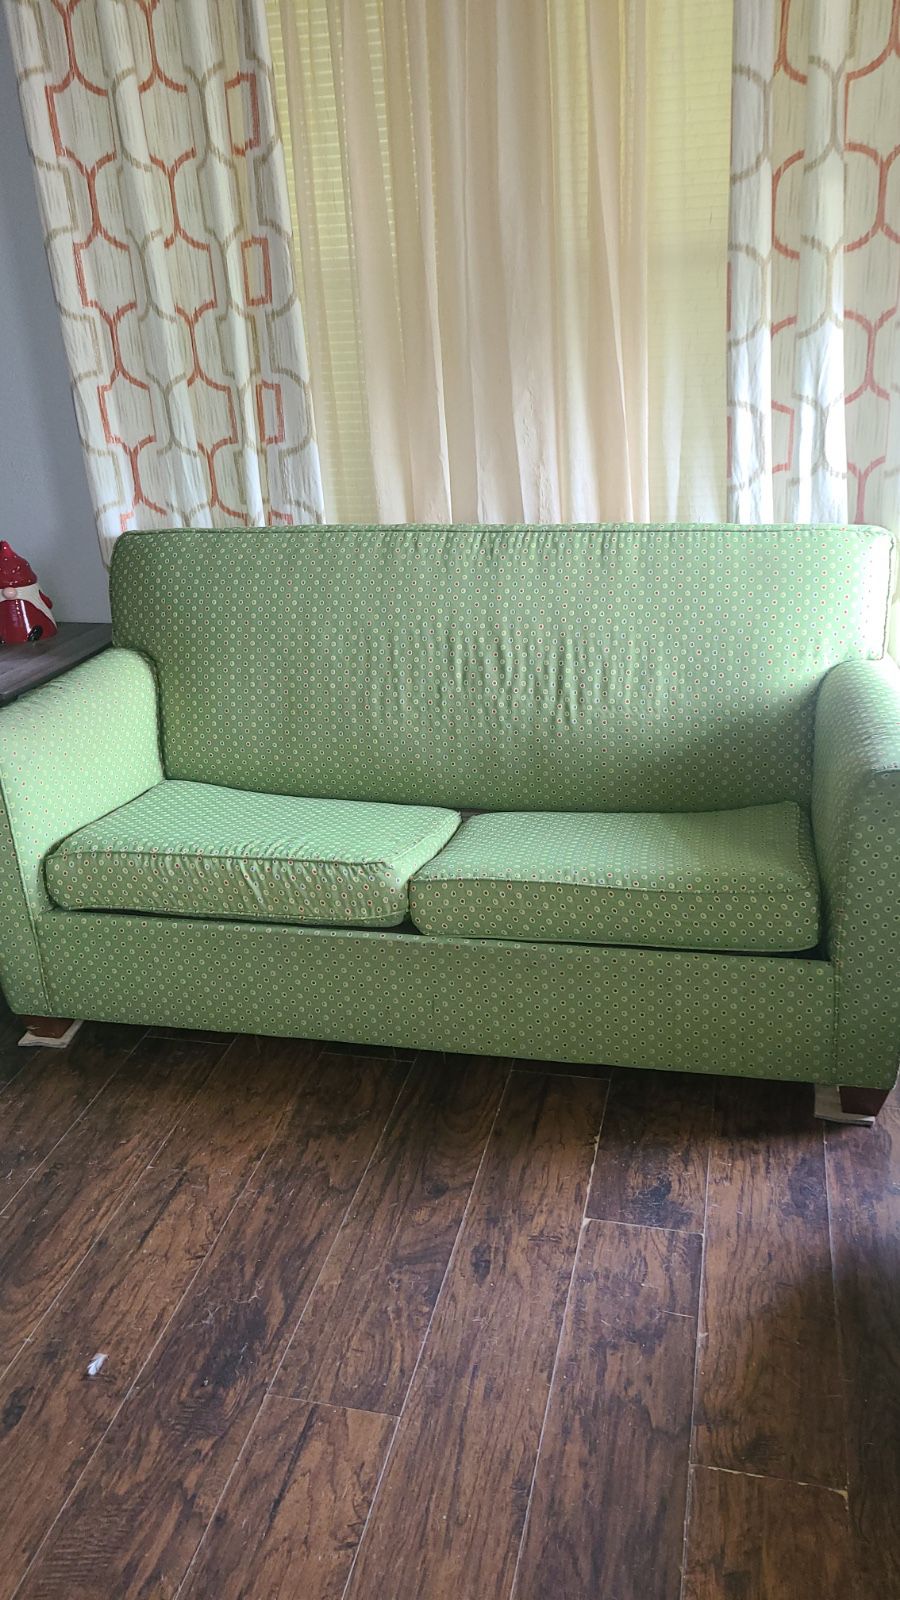 Green Polka dot Pullout Couch & Set